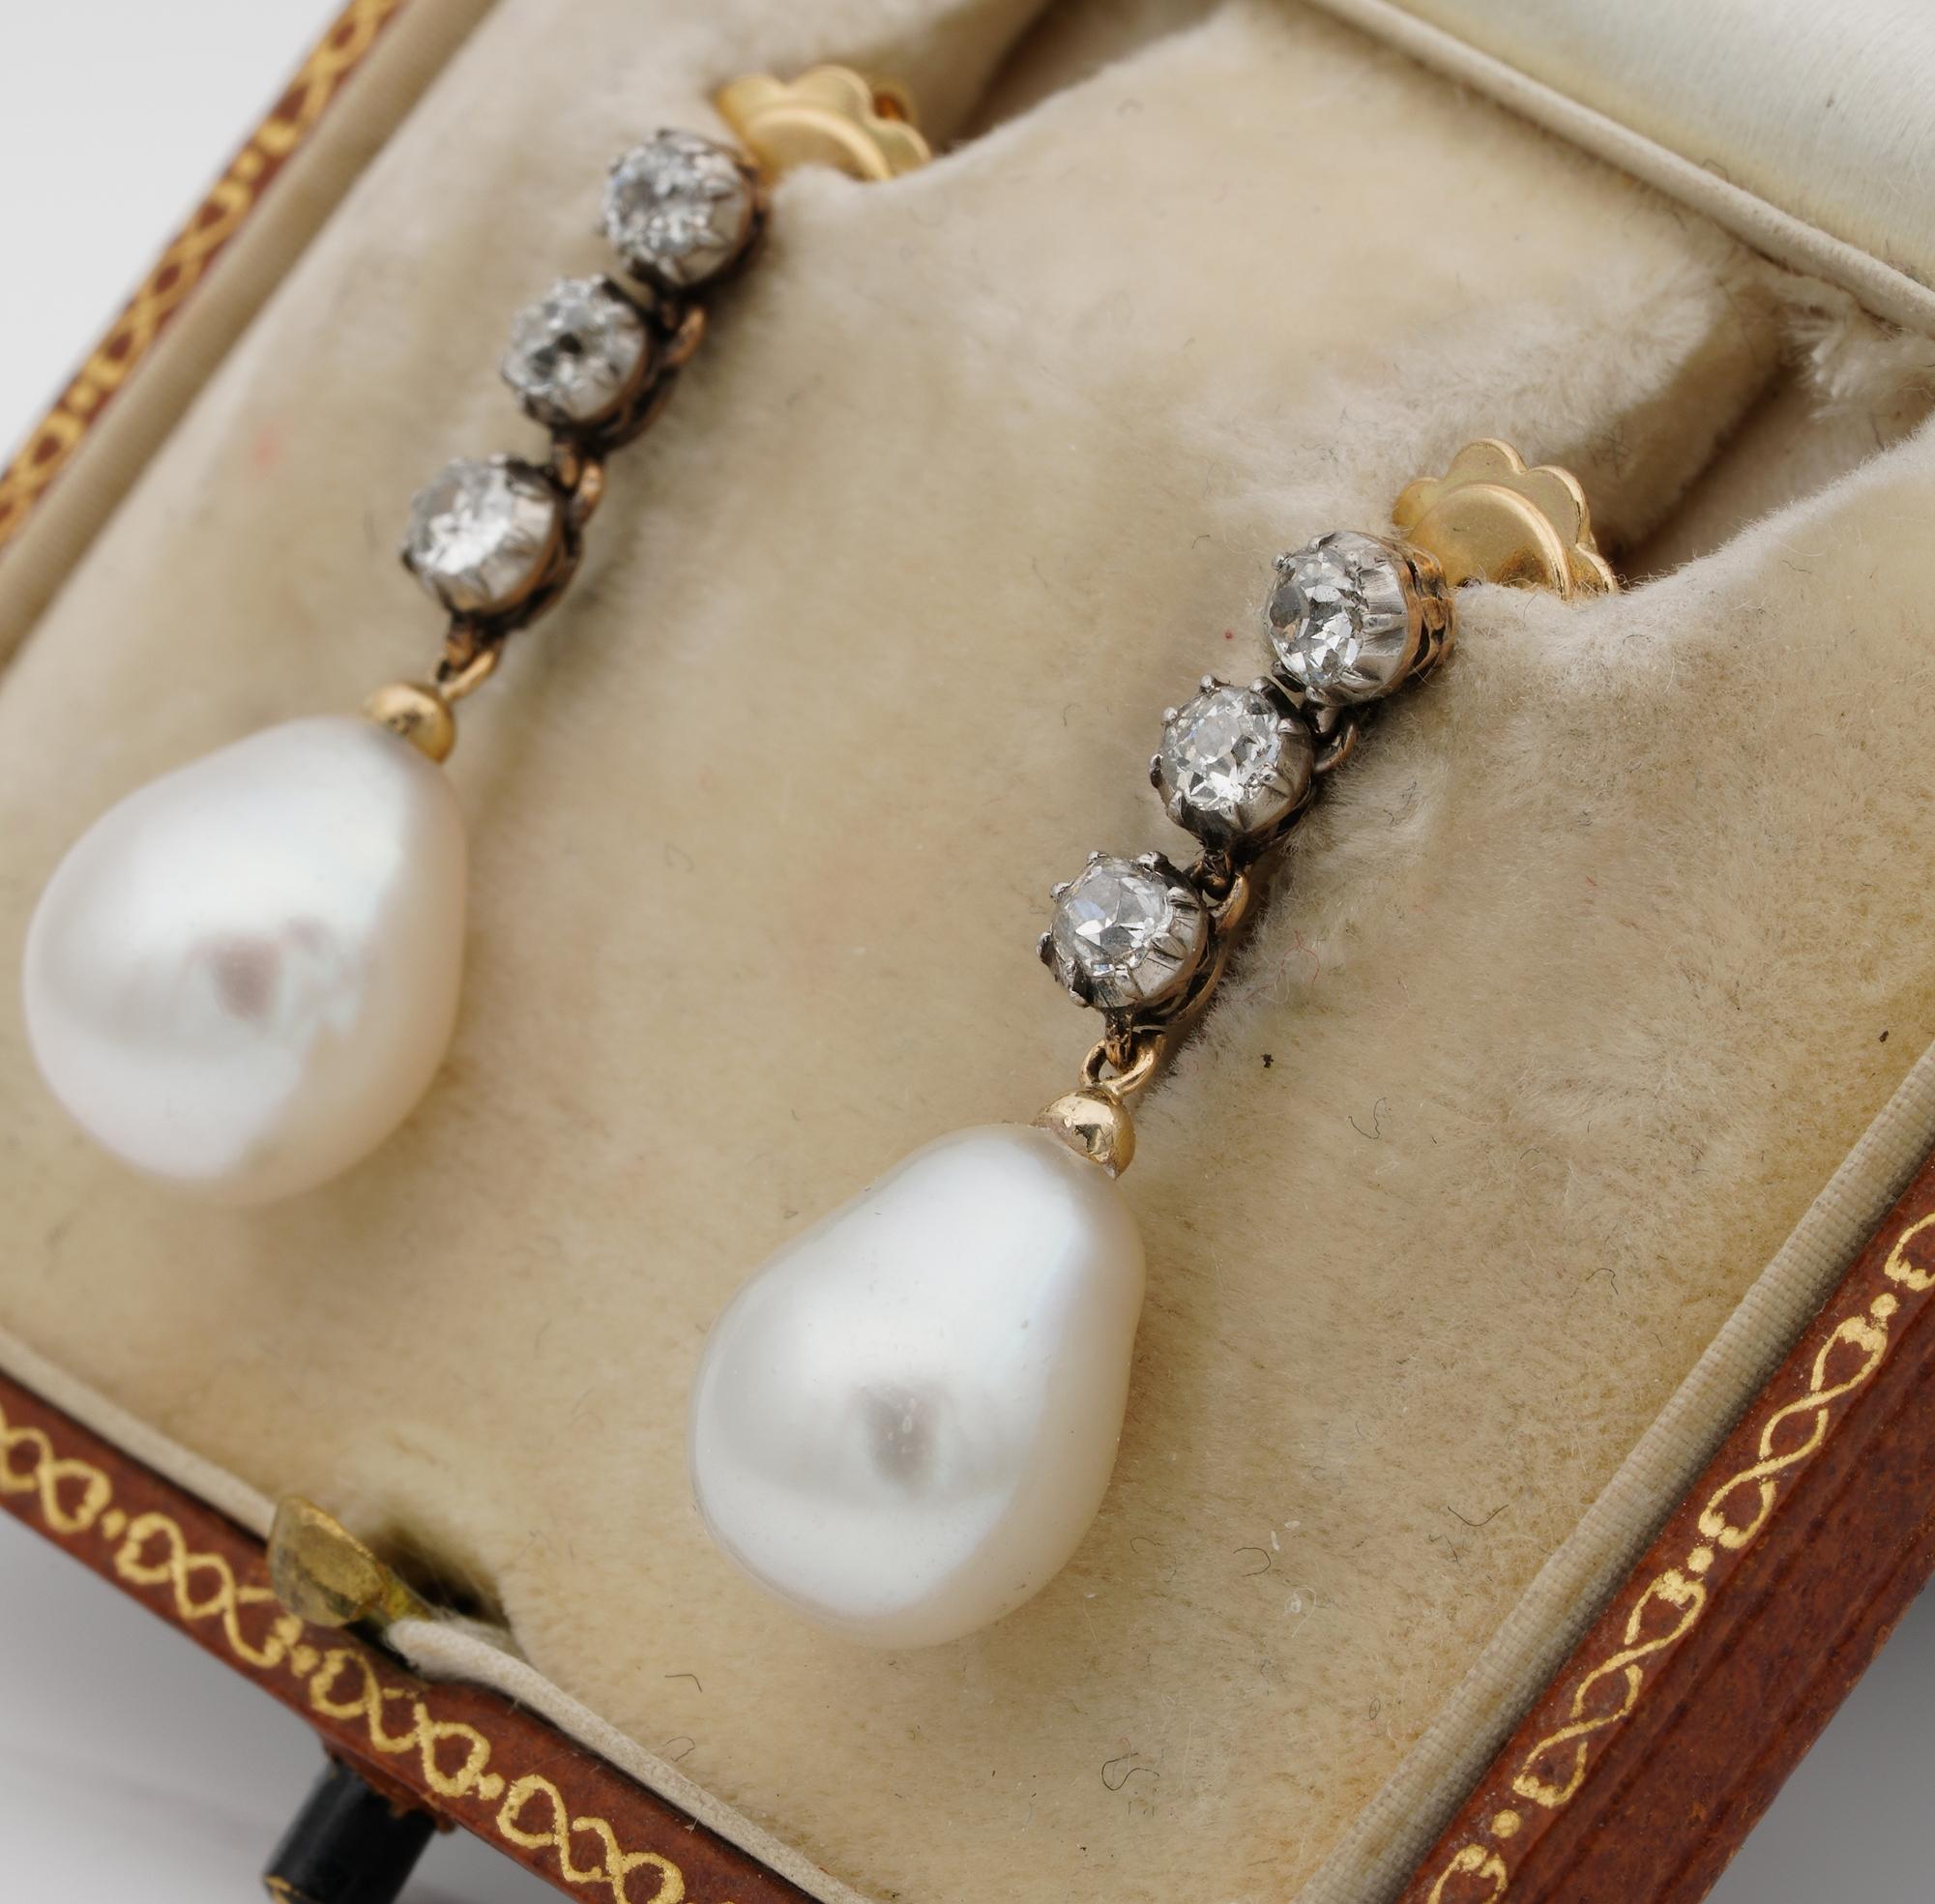 antique pearl and diamond earrings